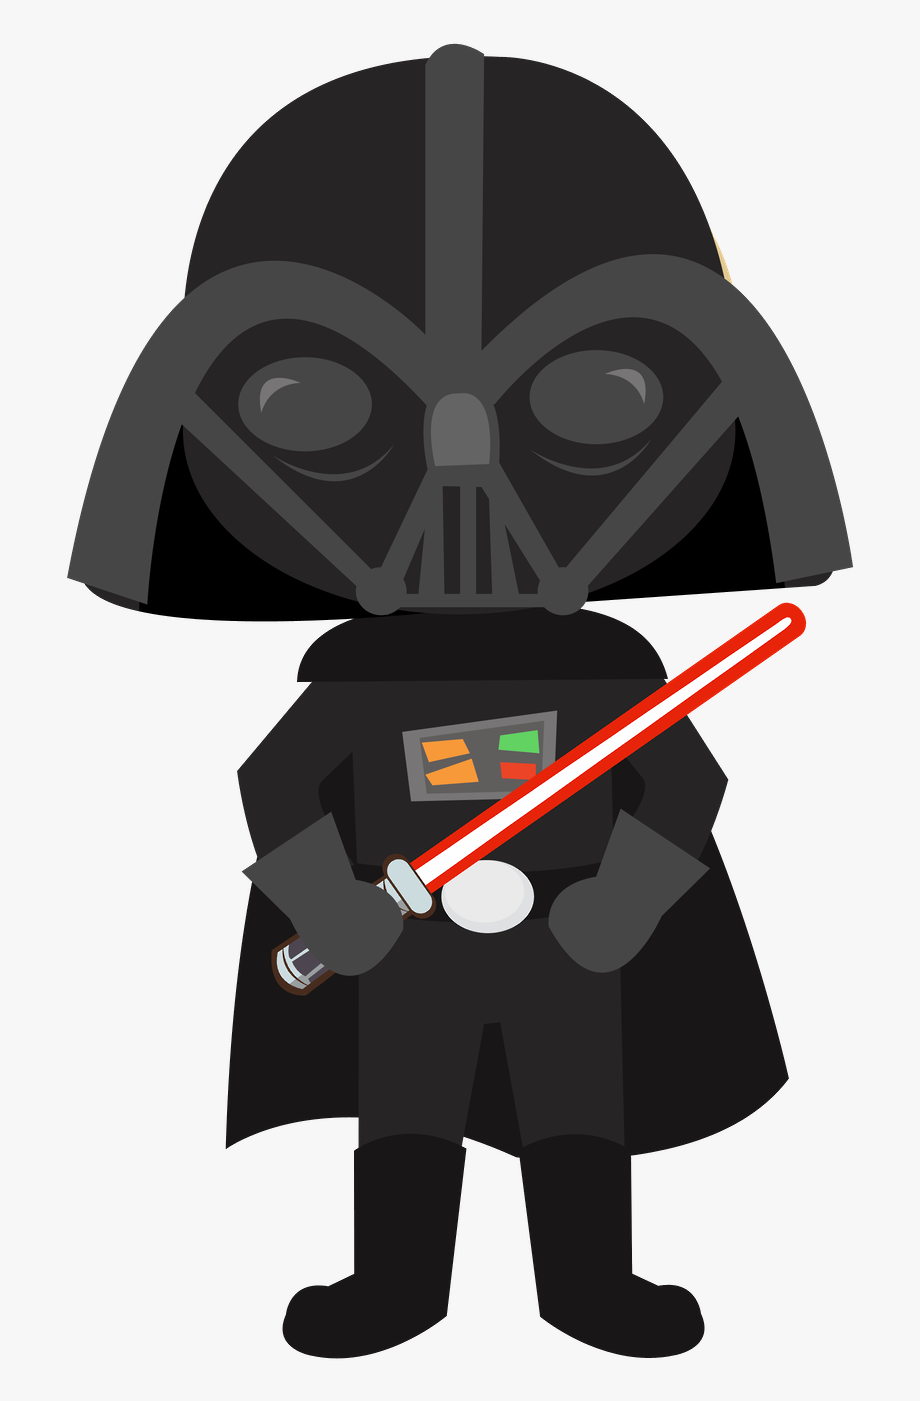 star wars images clipart 10 free Cliparts | Download images on